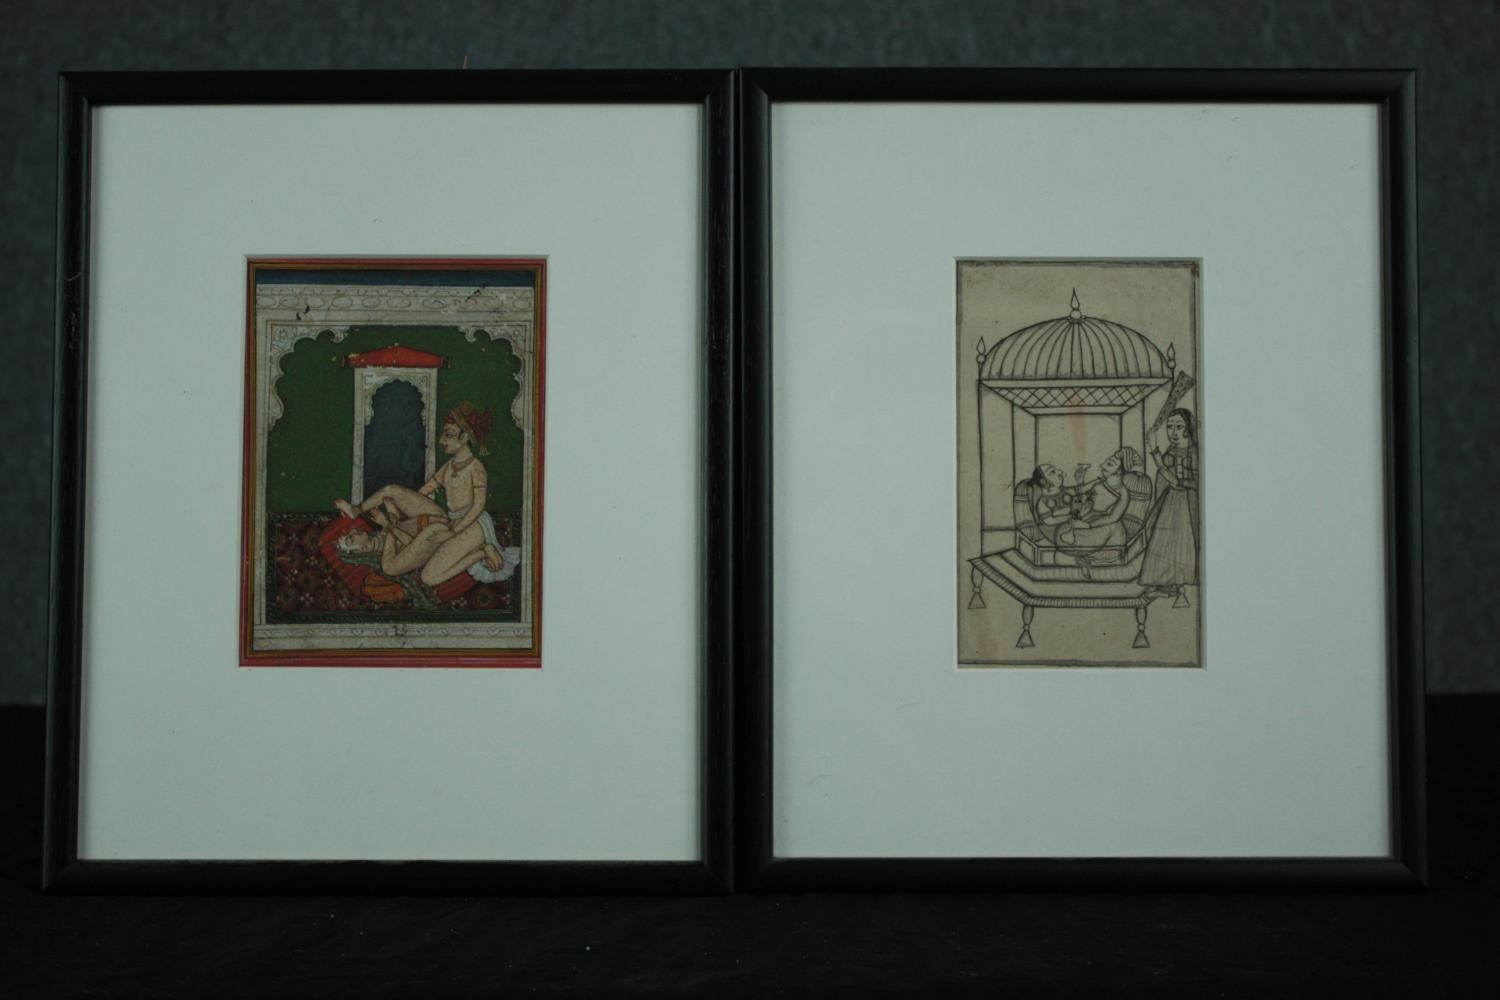 Two Indo-Persian gouache and pen works on paper. Probably nineteenth century. Framed. H.32 W.26